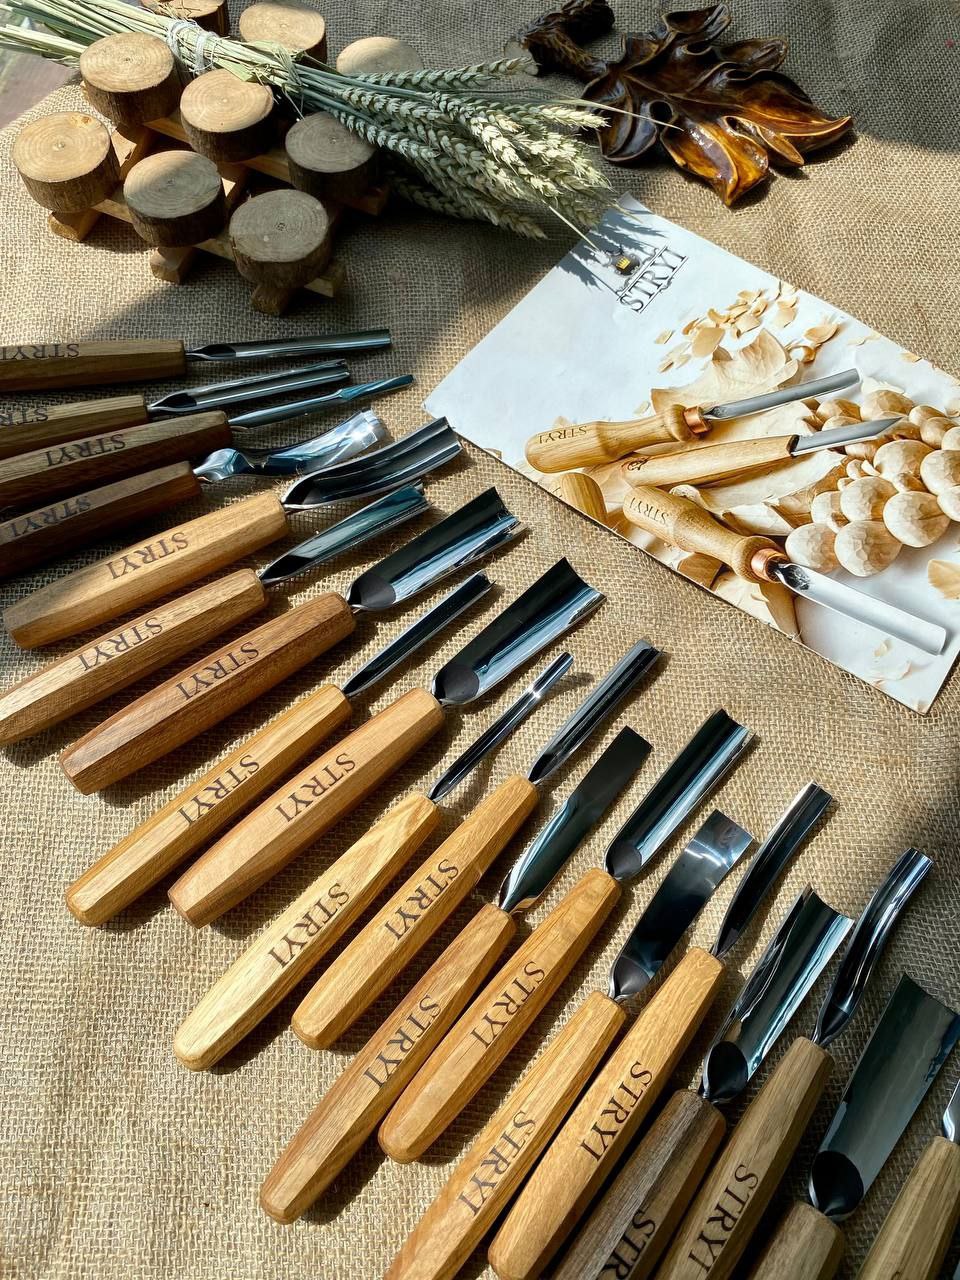 Chip carving knives set - Swiss chip carving knives set - The